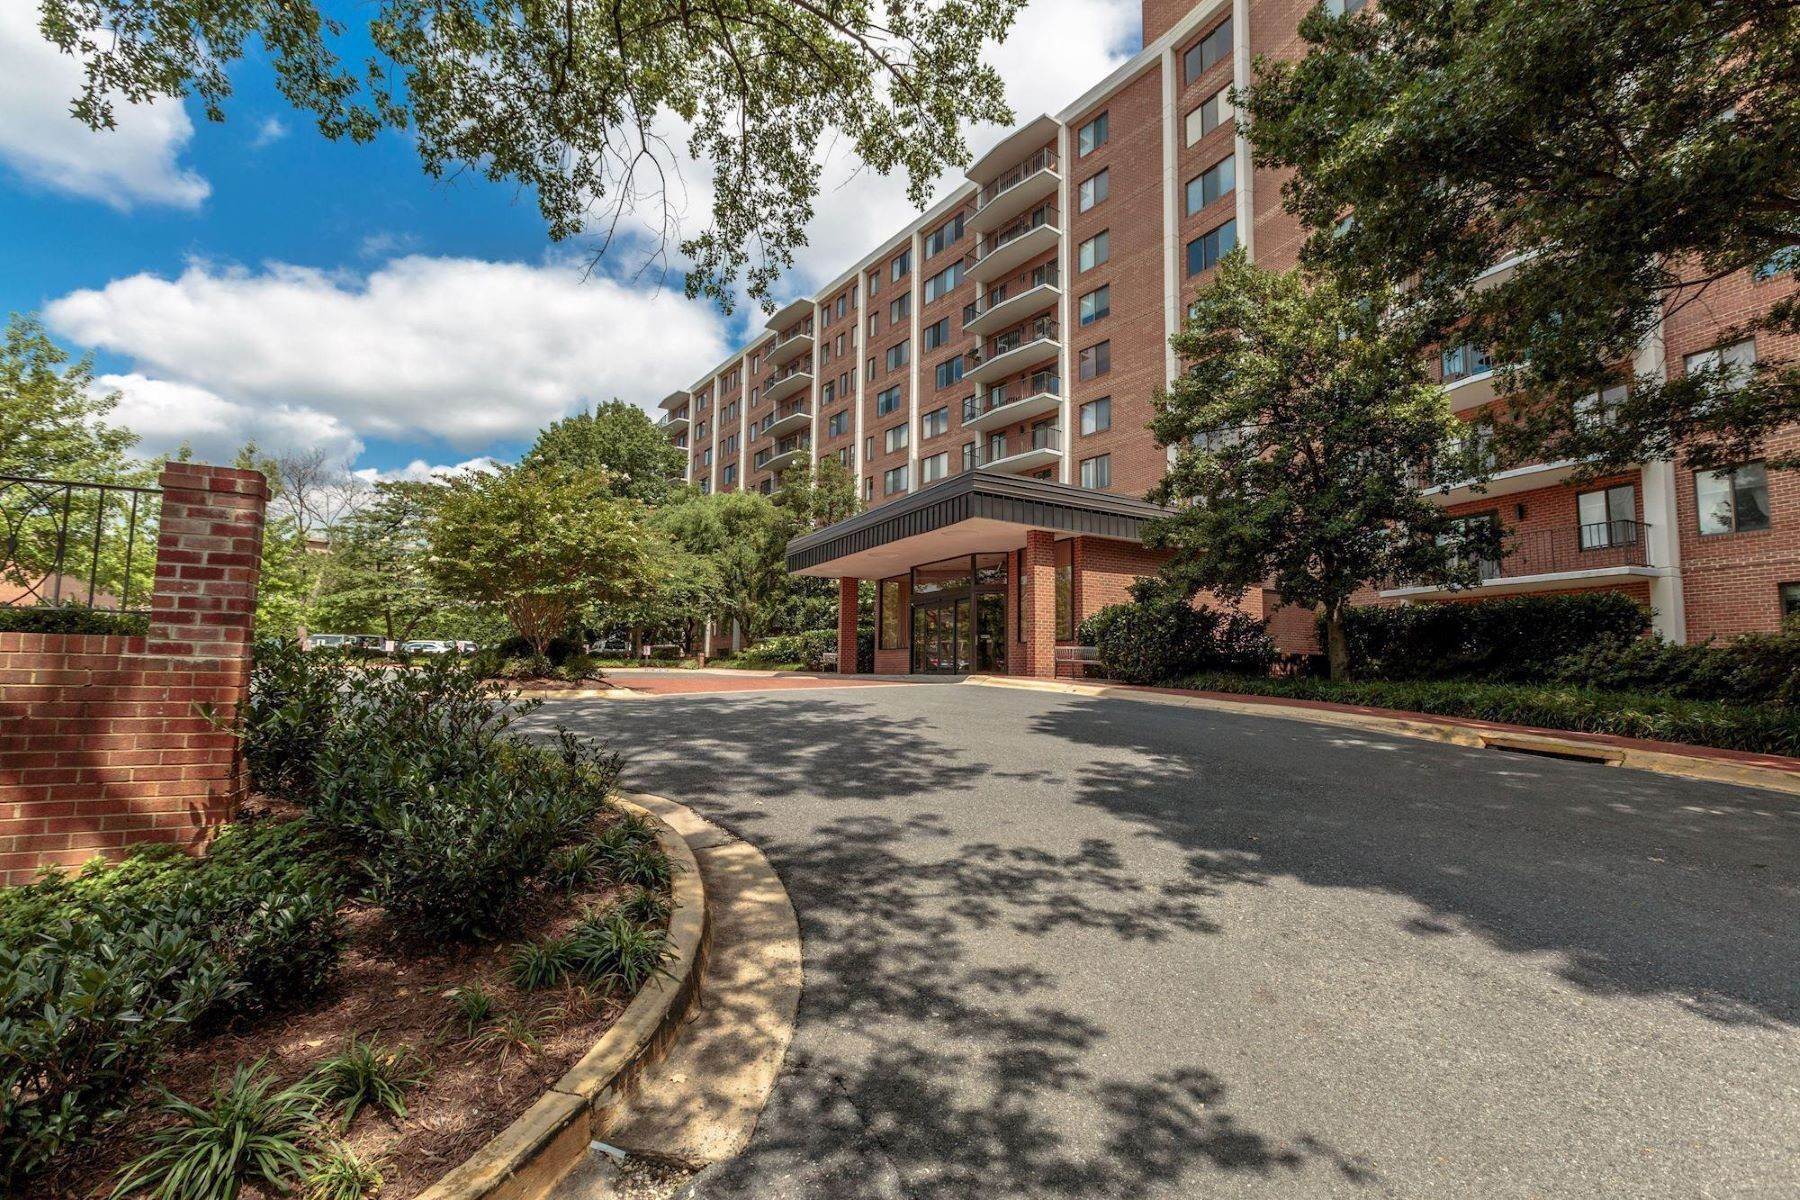 Condominiums for Sale at 3101 New Mexico Ave Nw #555 Washington, District Of Columbia 20016 United States